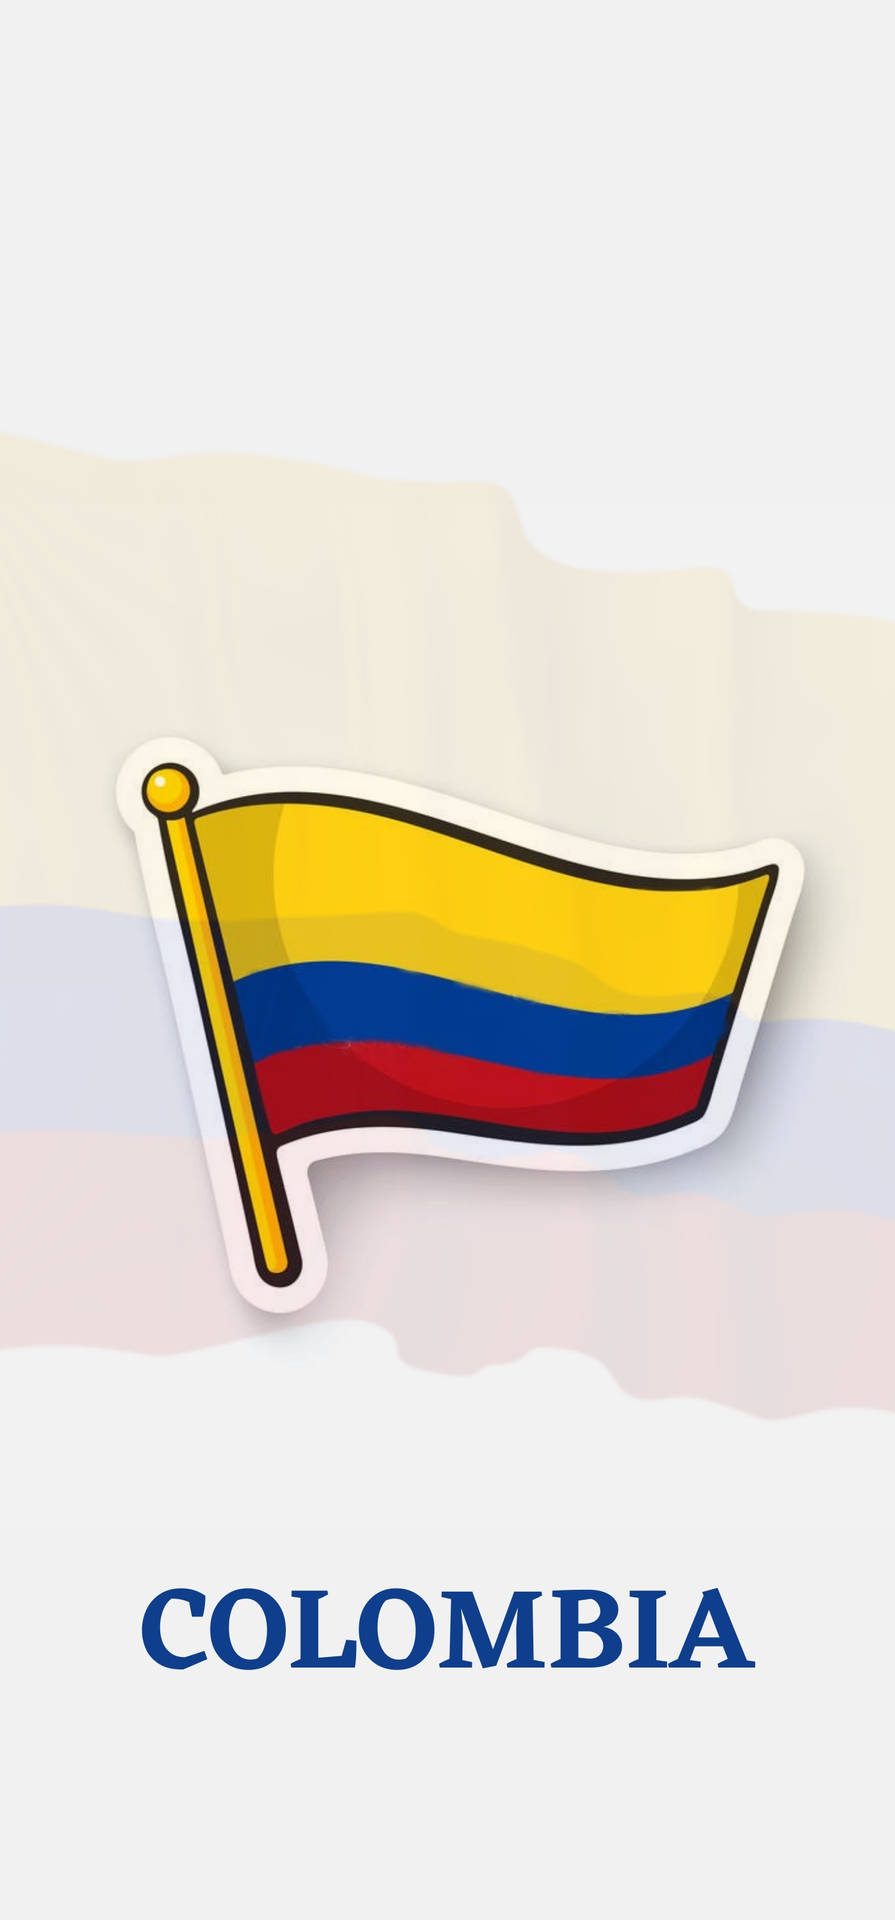 Colombia Flag Vector Wallpaper